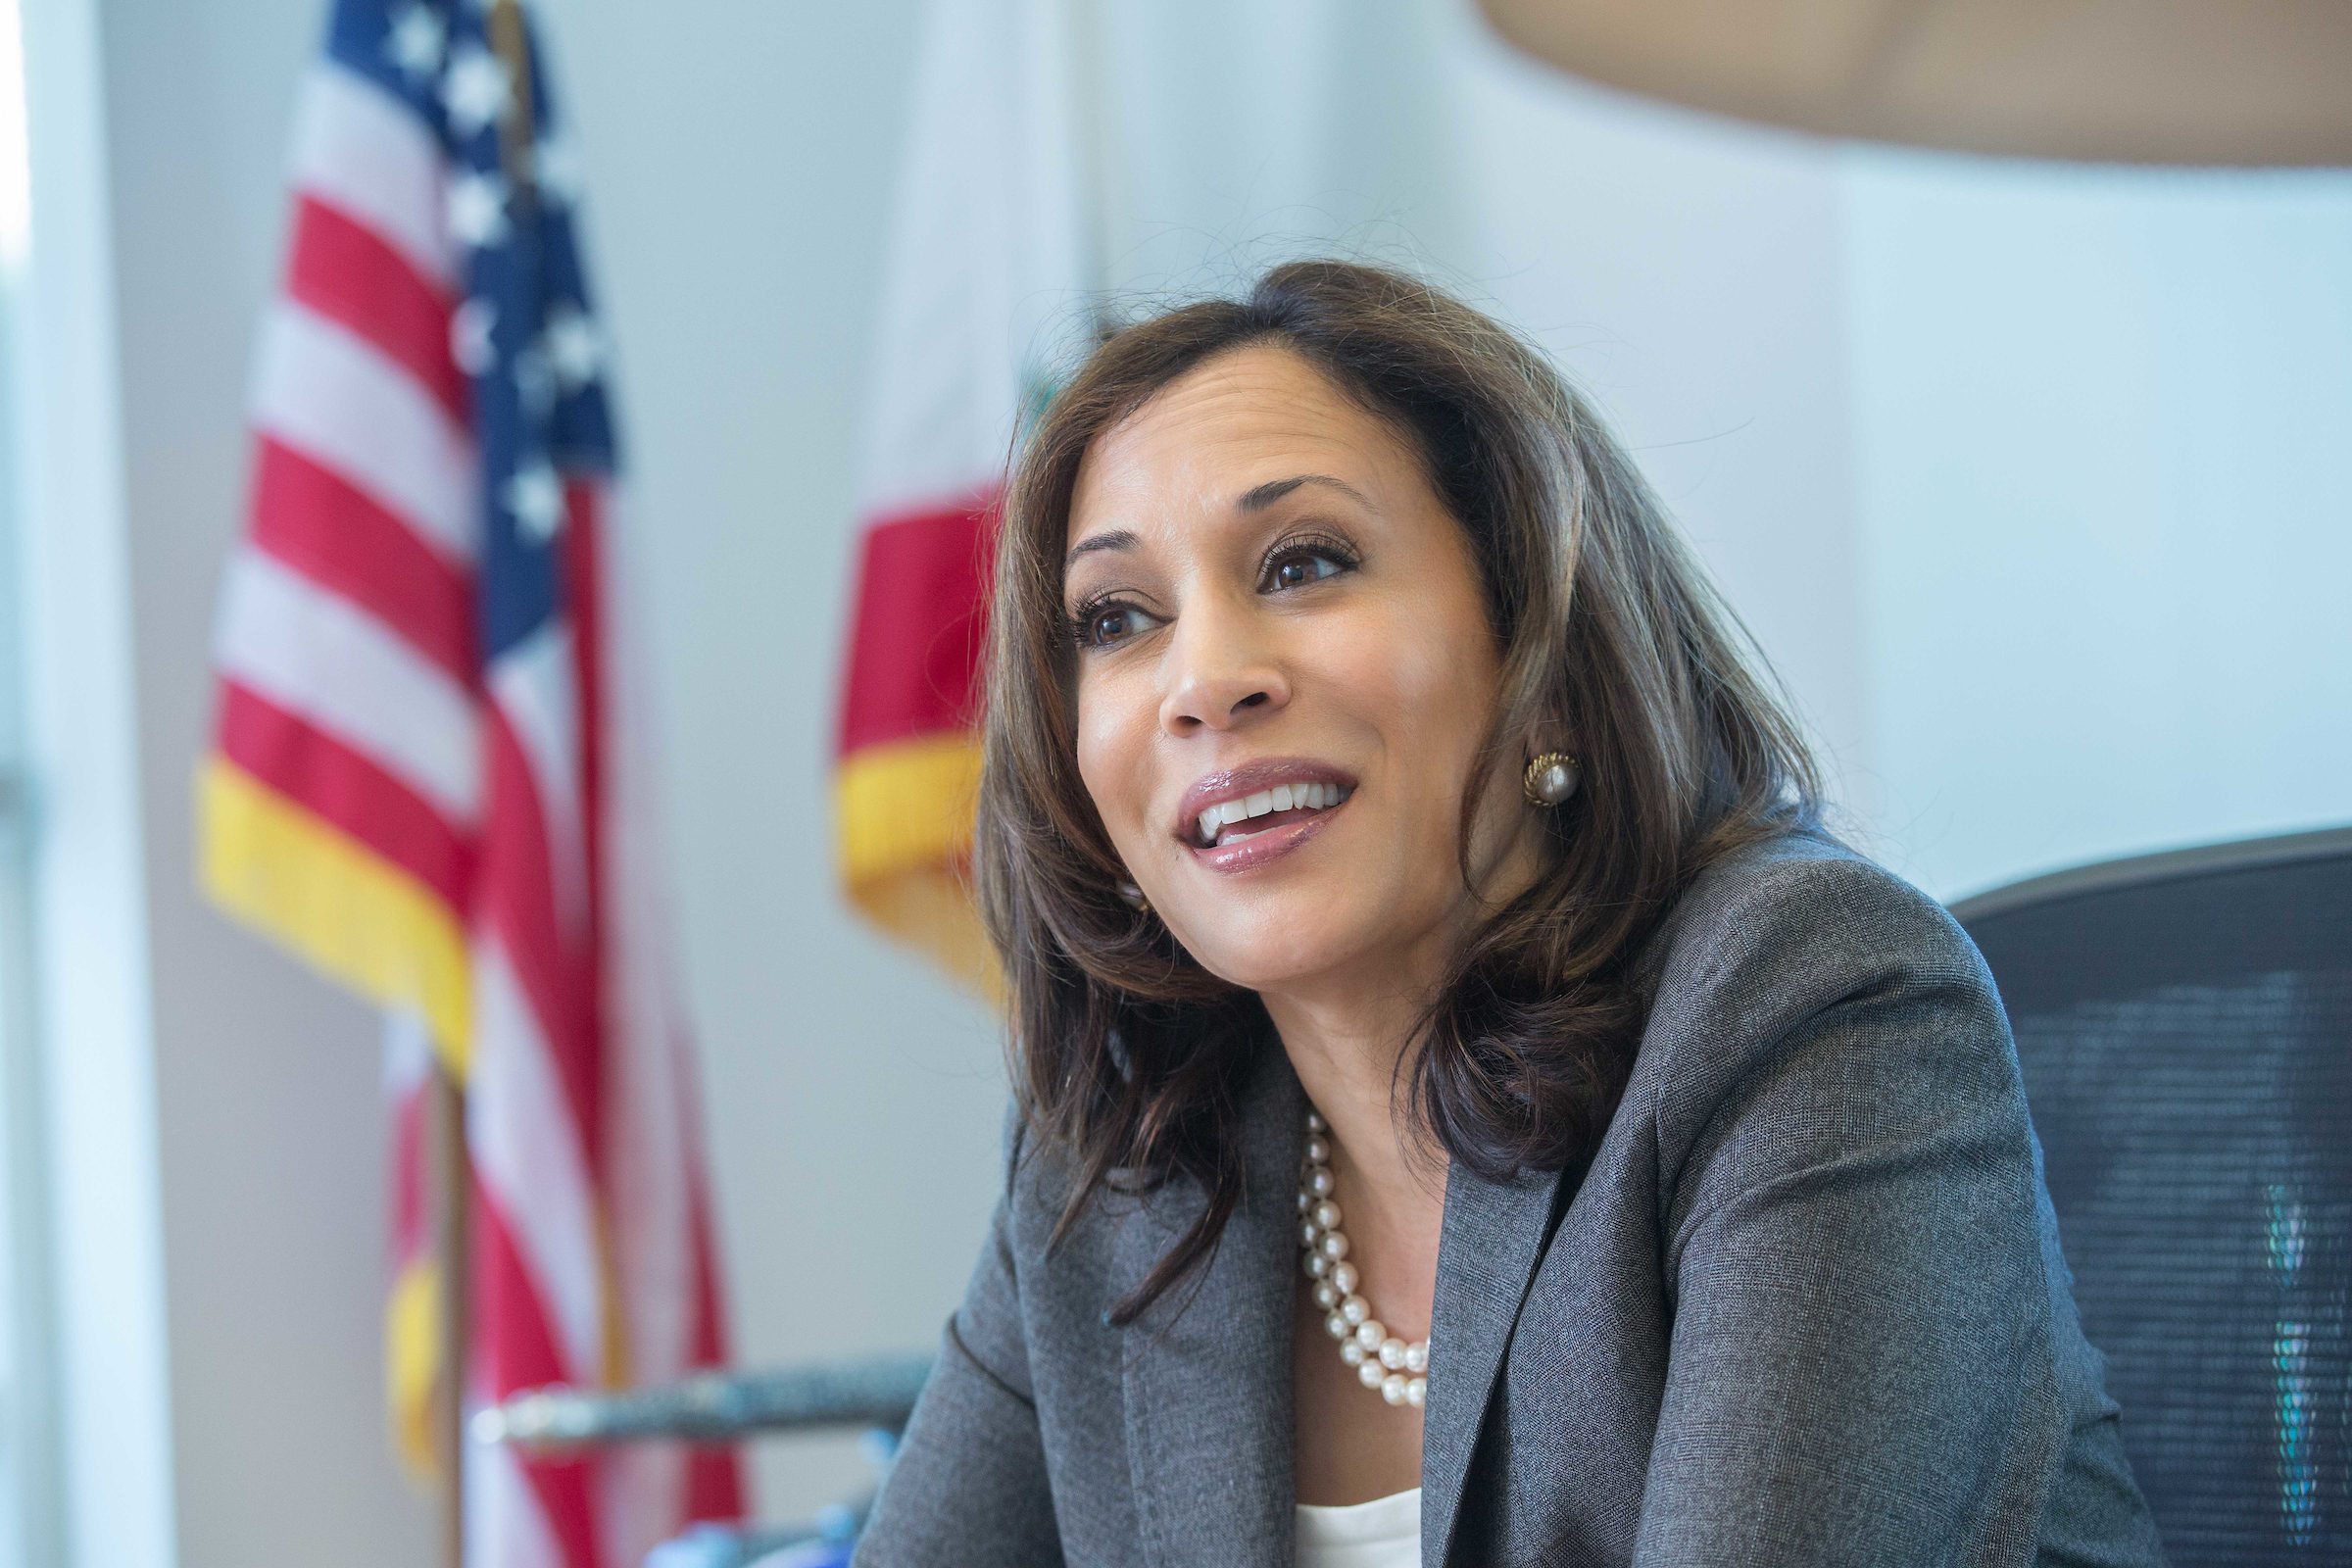 Kamala Harris Sitting and smiling with an American Flag Behind Her